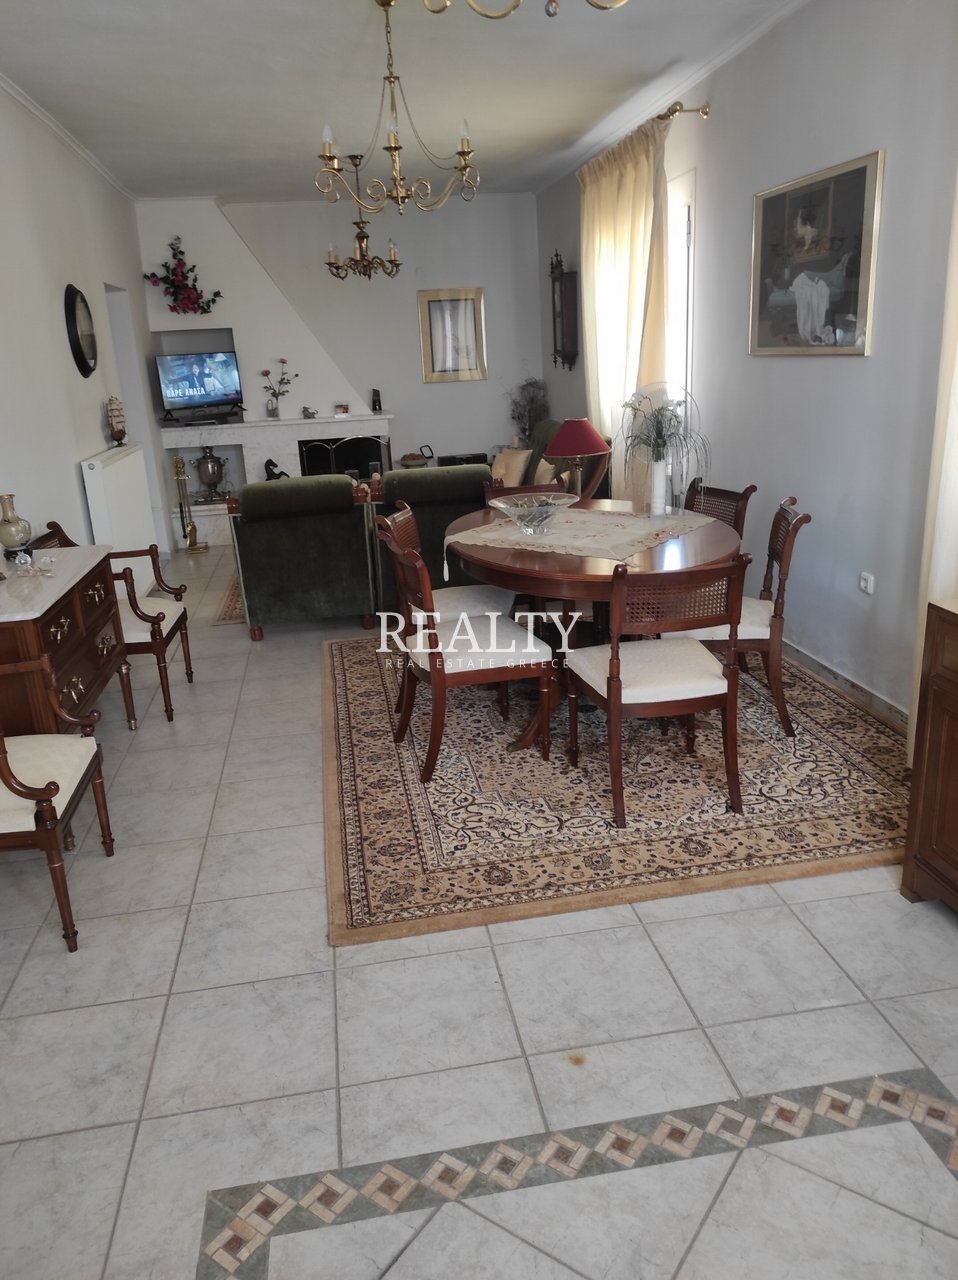 SINGLE FAMILY HOUSE for Sale - NORTHERN GREECE